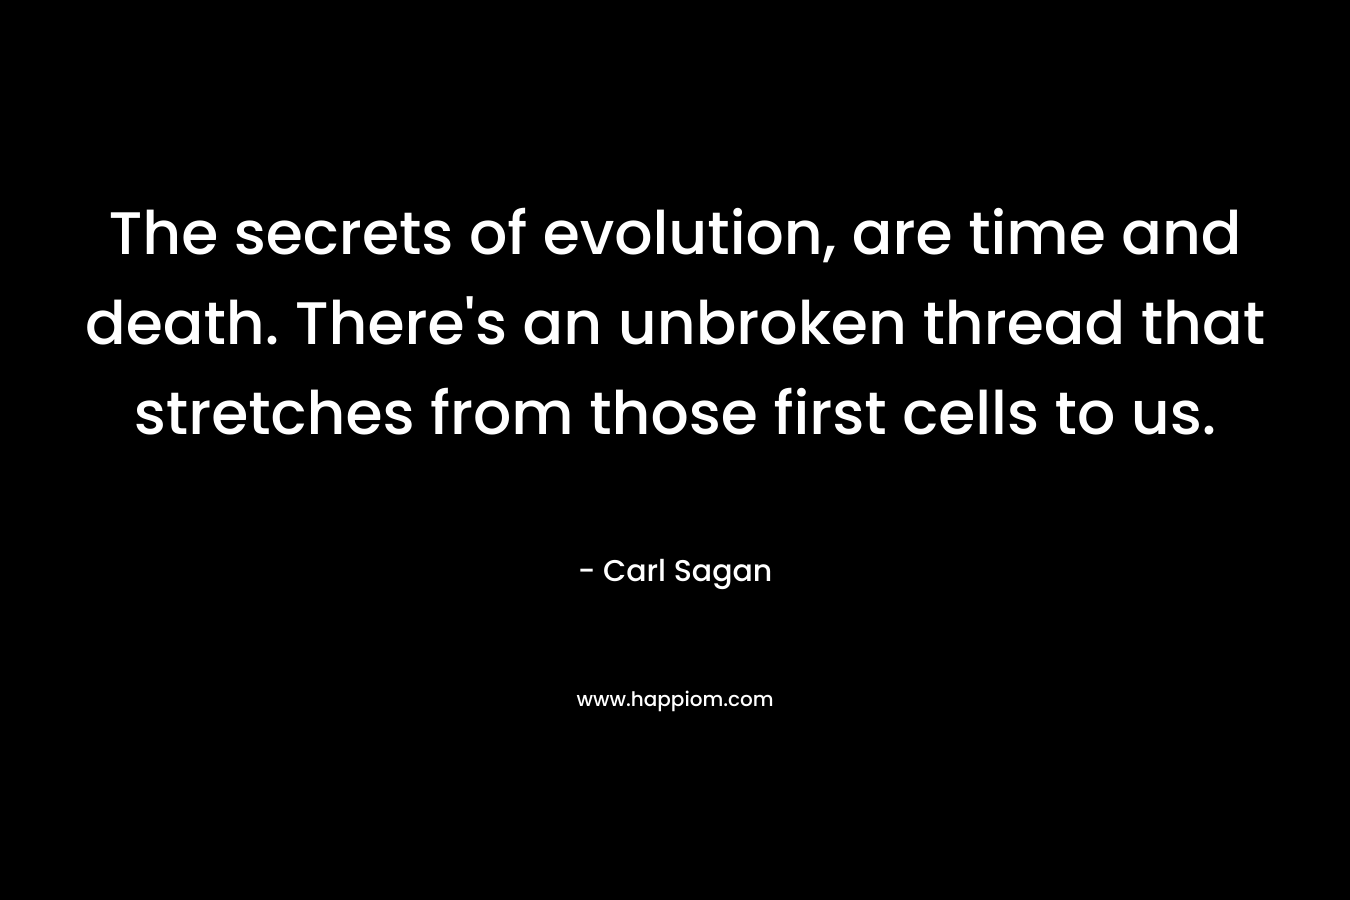 The secrets of evolution, are time and death. There’s an unbroken thread that stretches from those first cells to us. – Carl Sagan